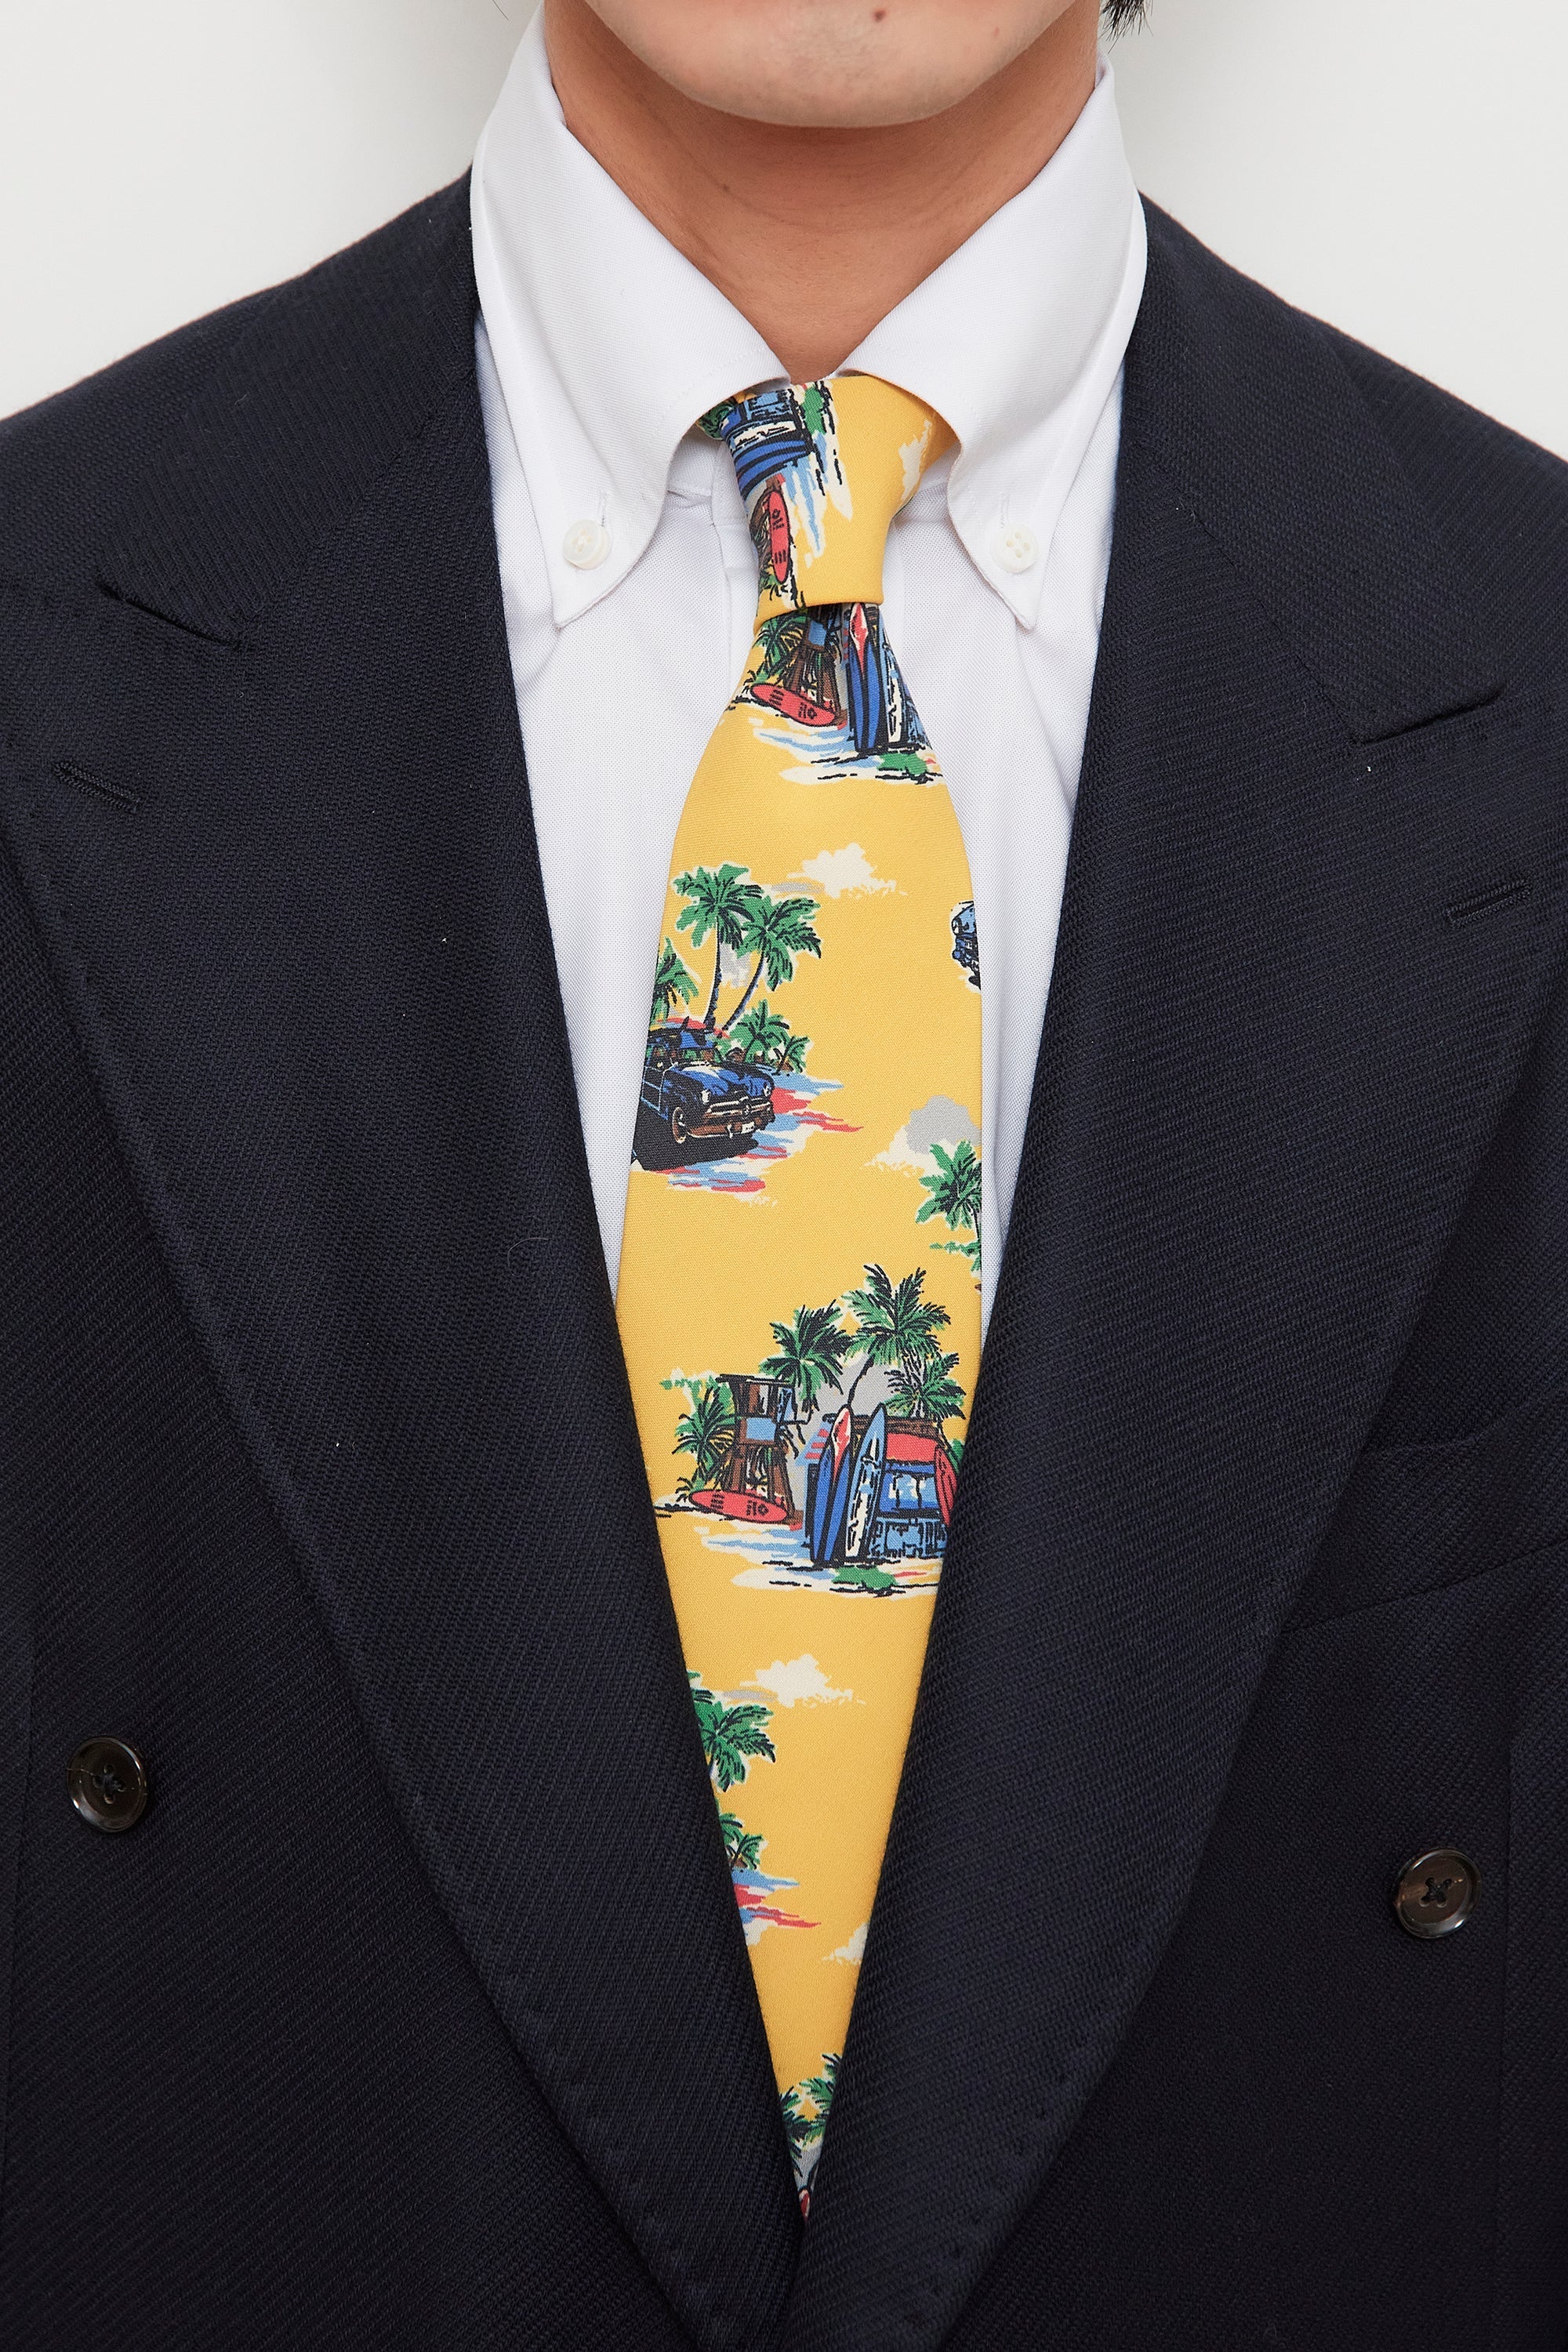 Drake's Yellow Car and Surfboard Pattern Silk Tie